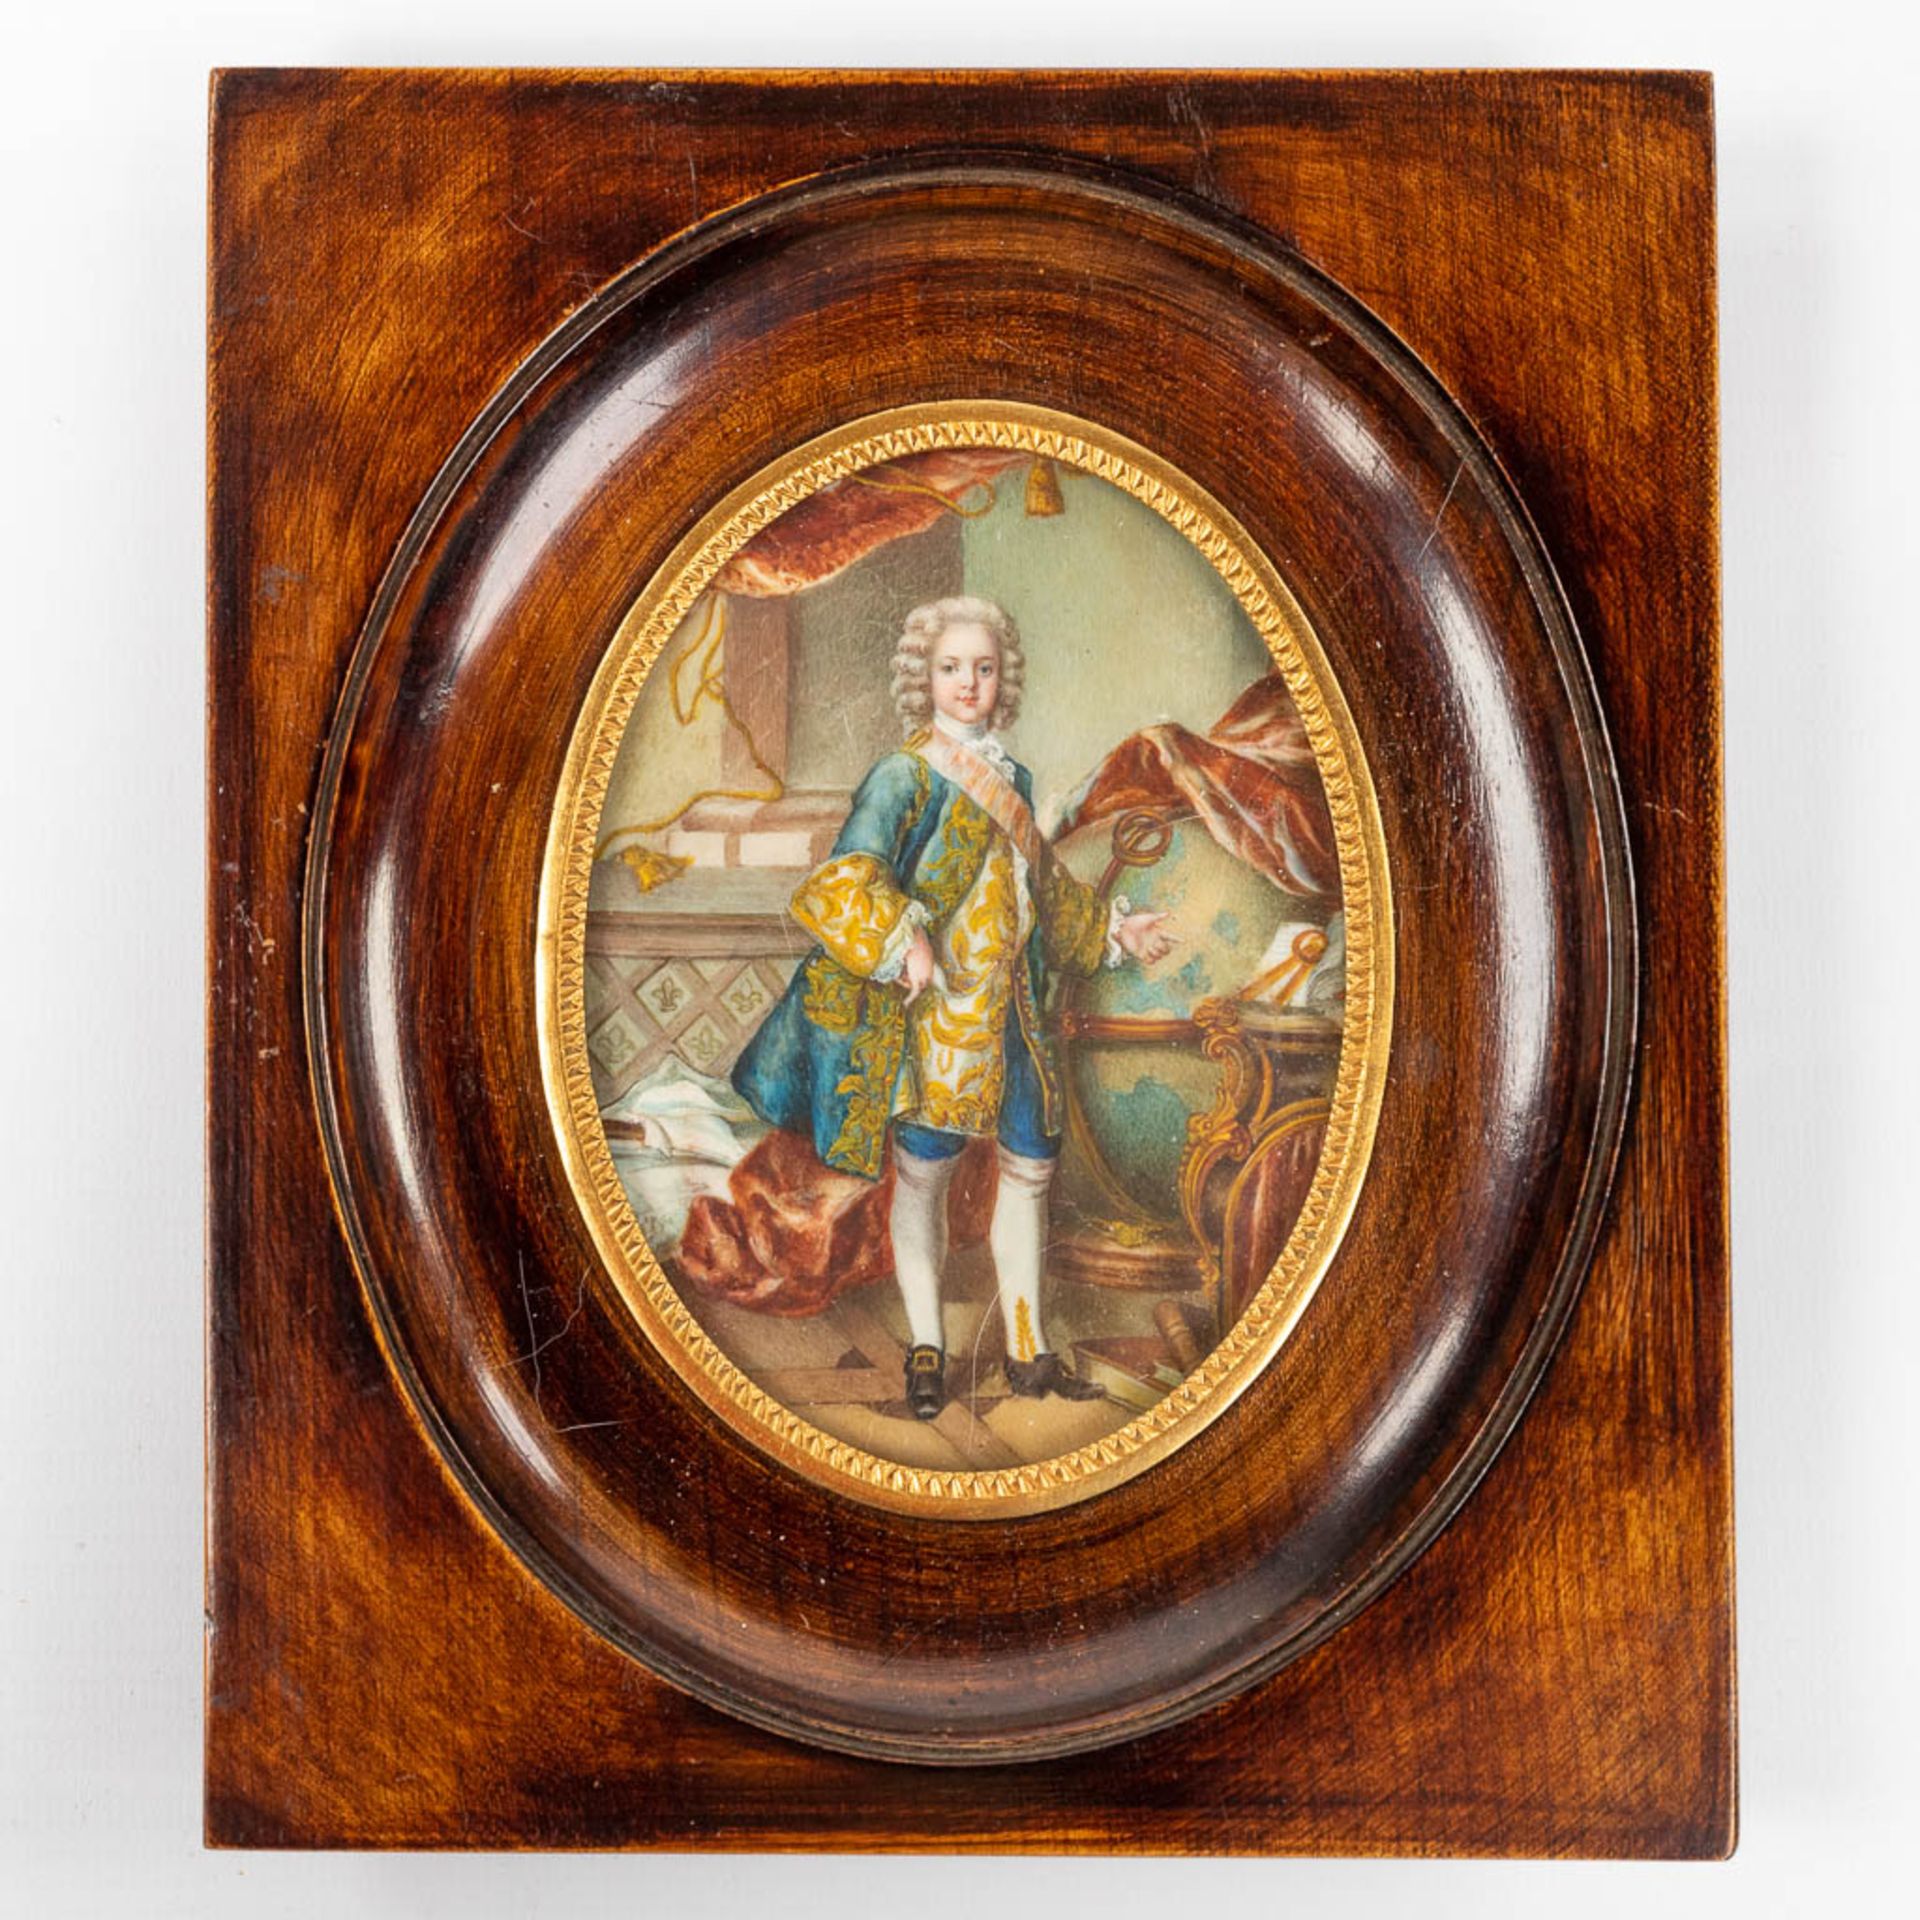 Seven miniature framed paintings, 19th C. (W:17 x H:20 cm) - Image 11 of 13